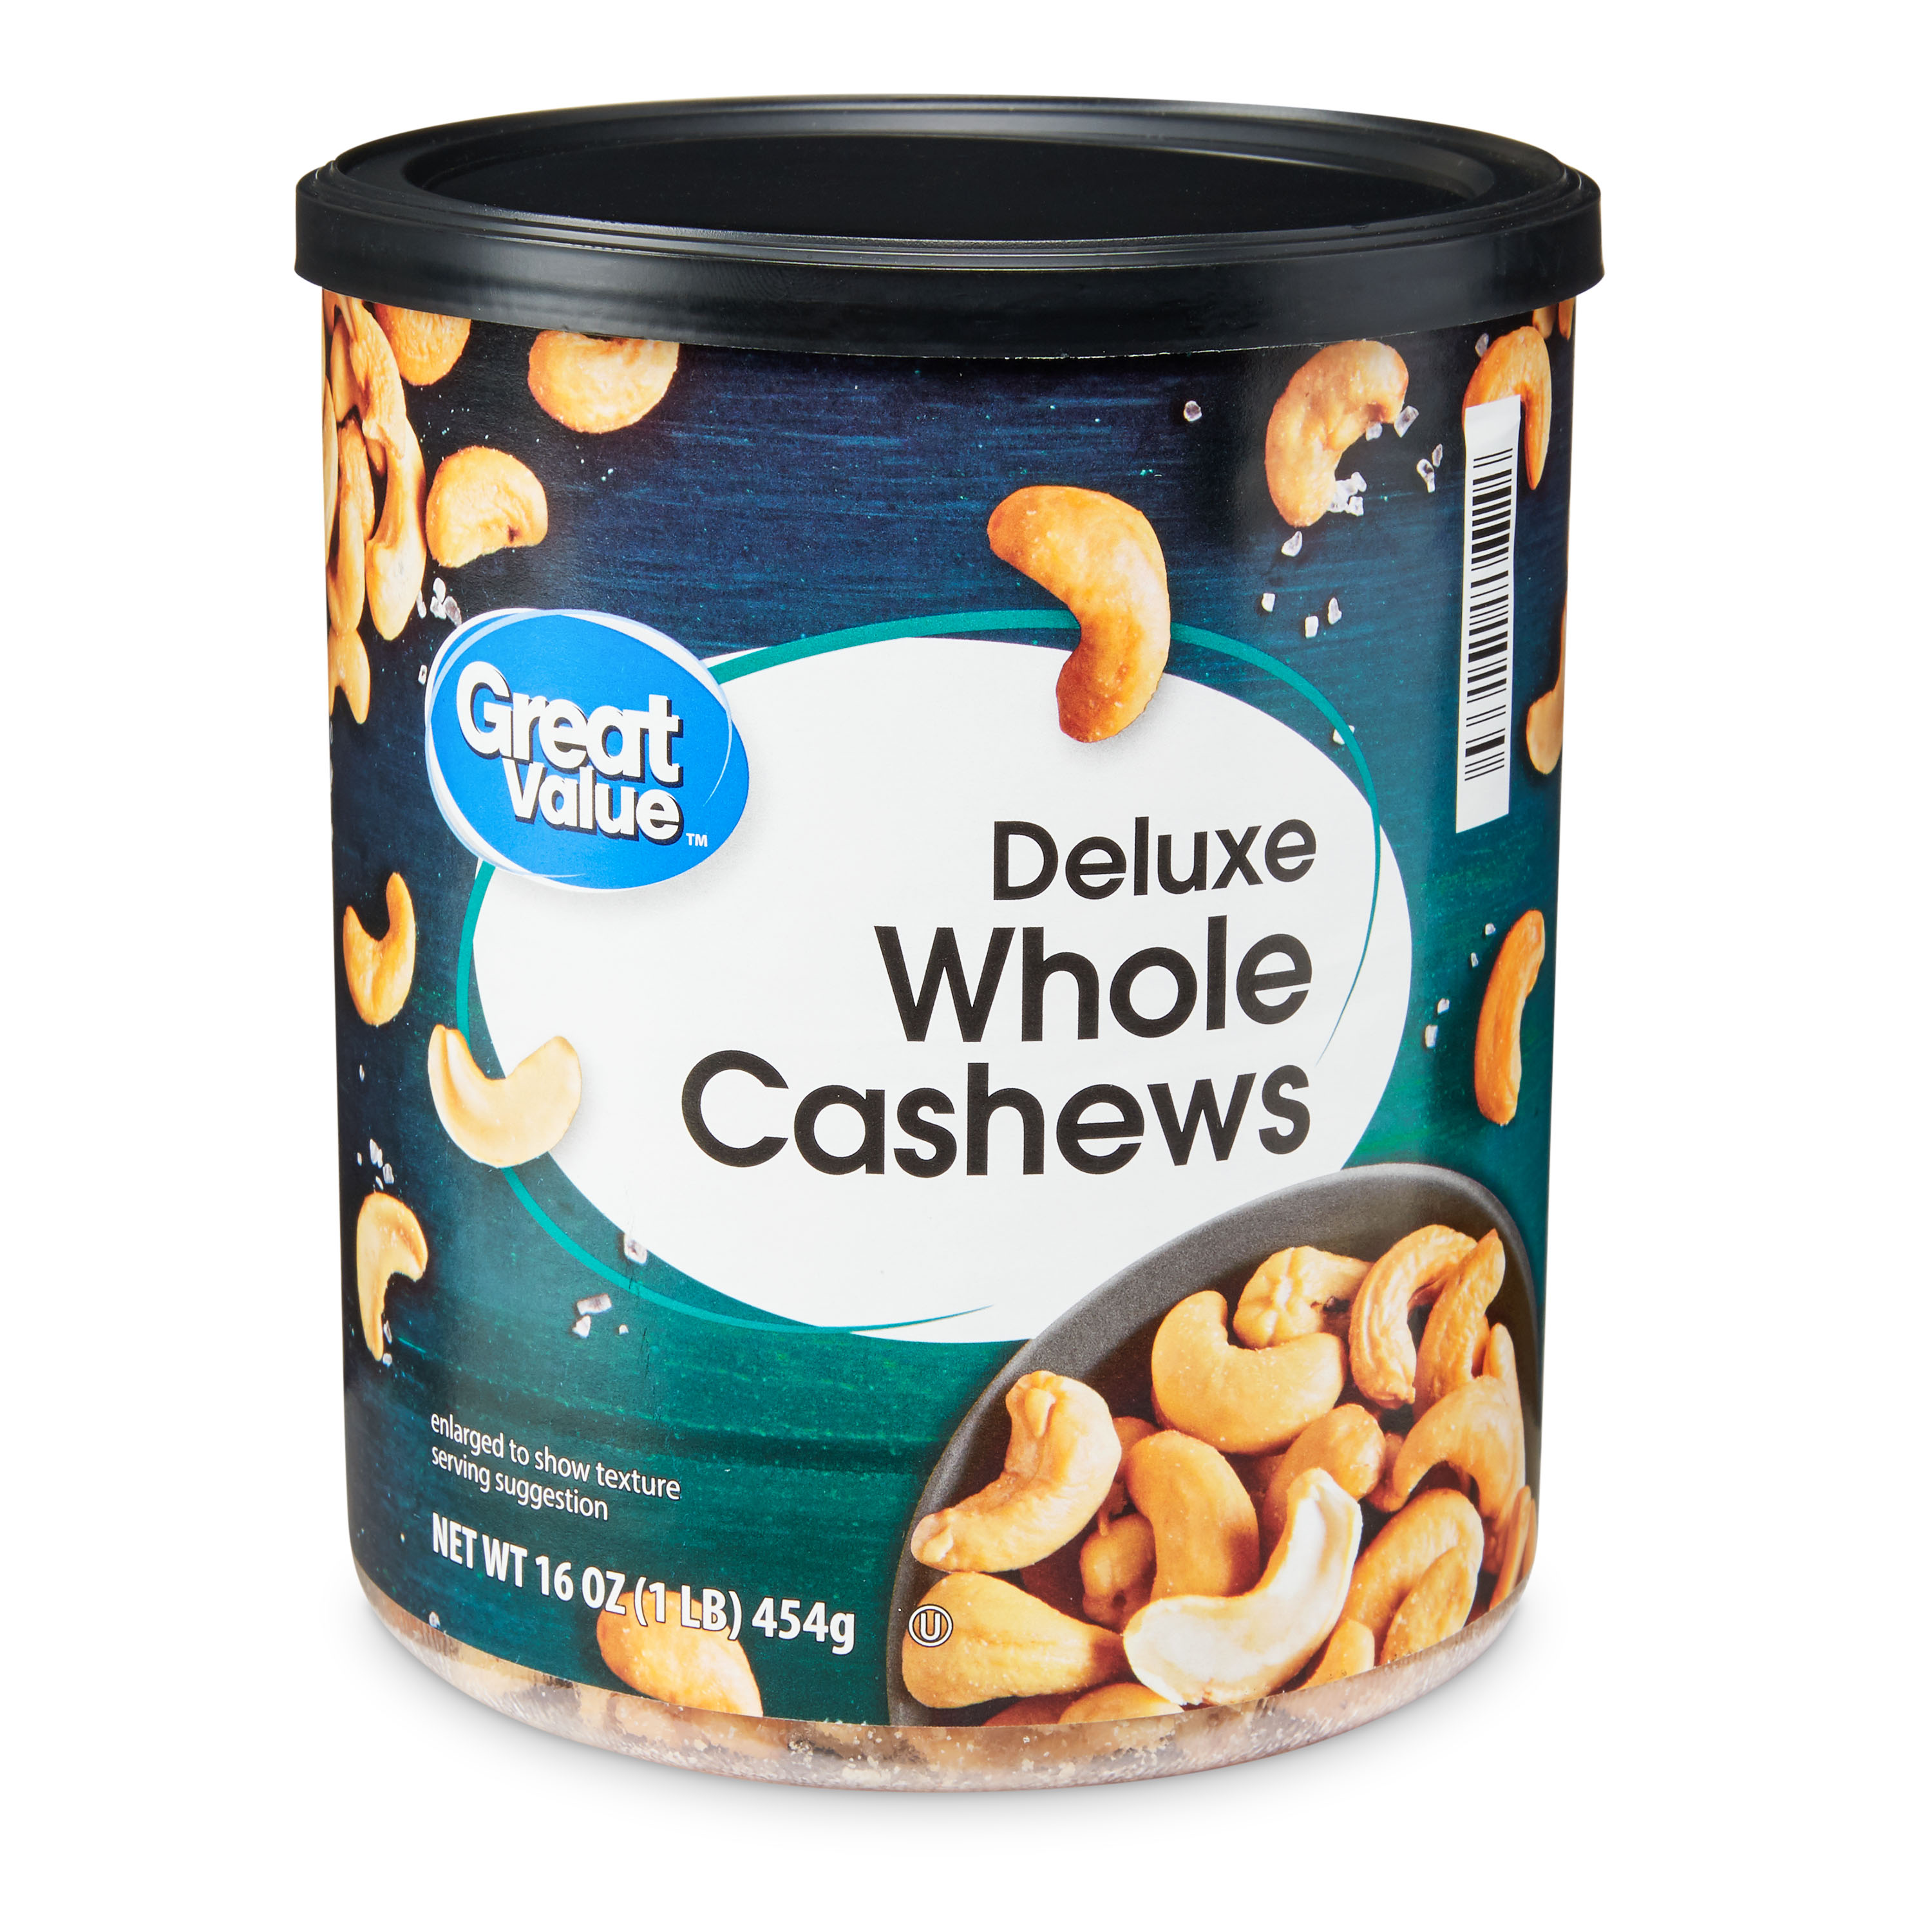 Great Value Deluxe Whole Cashews, Salted, 16 Oz Image